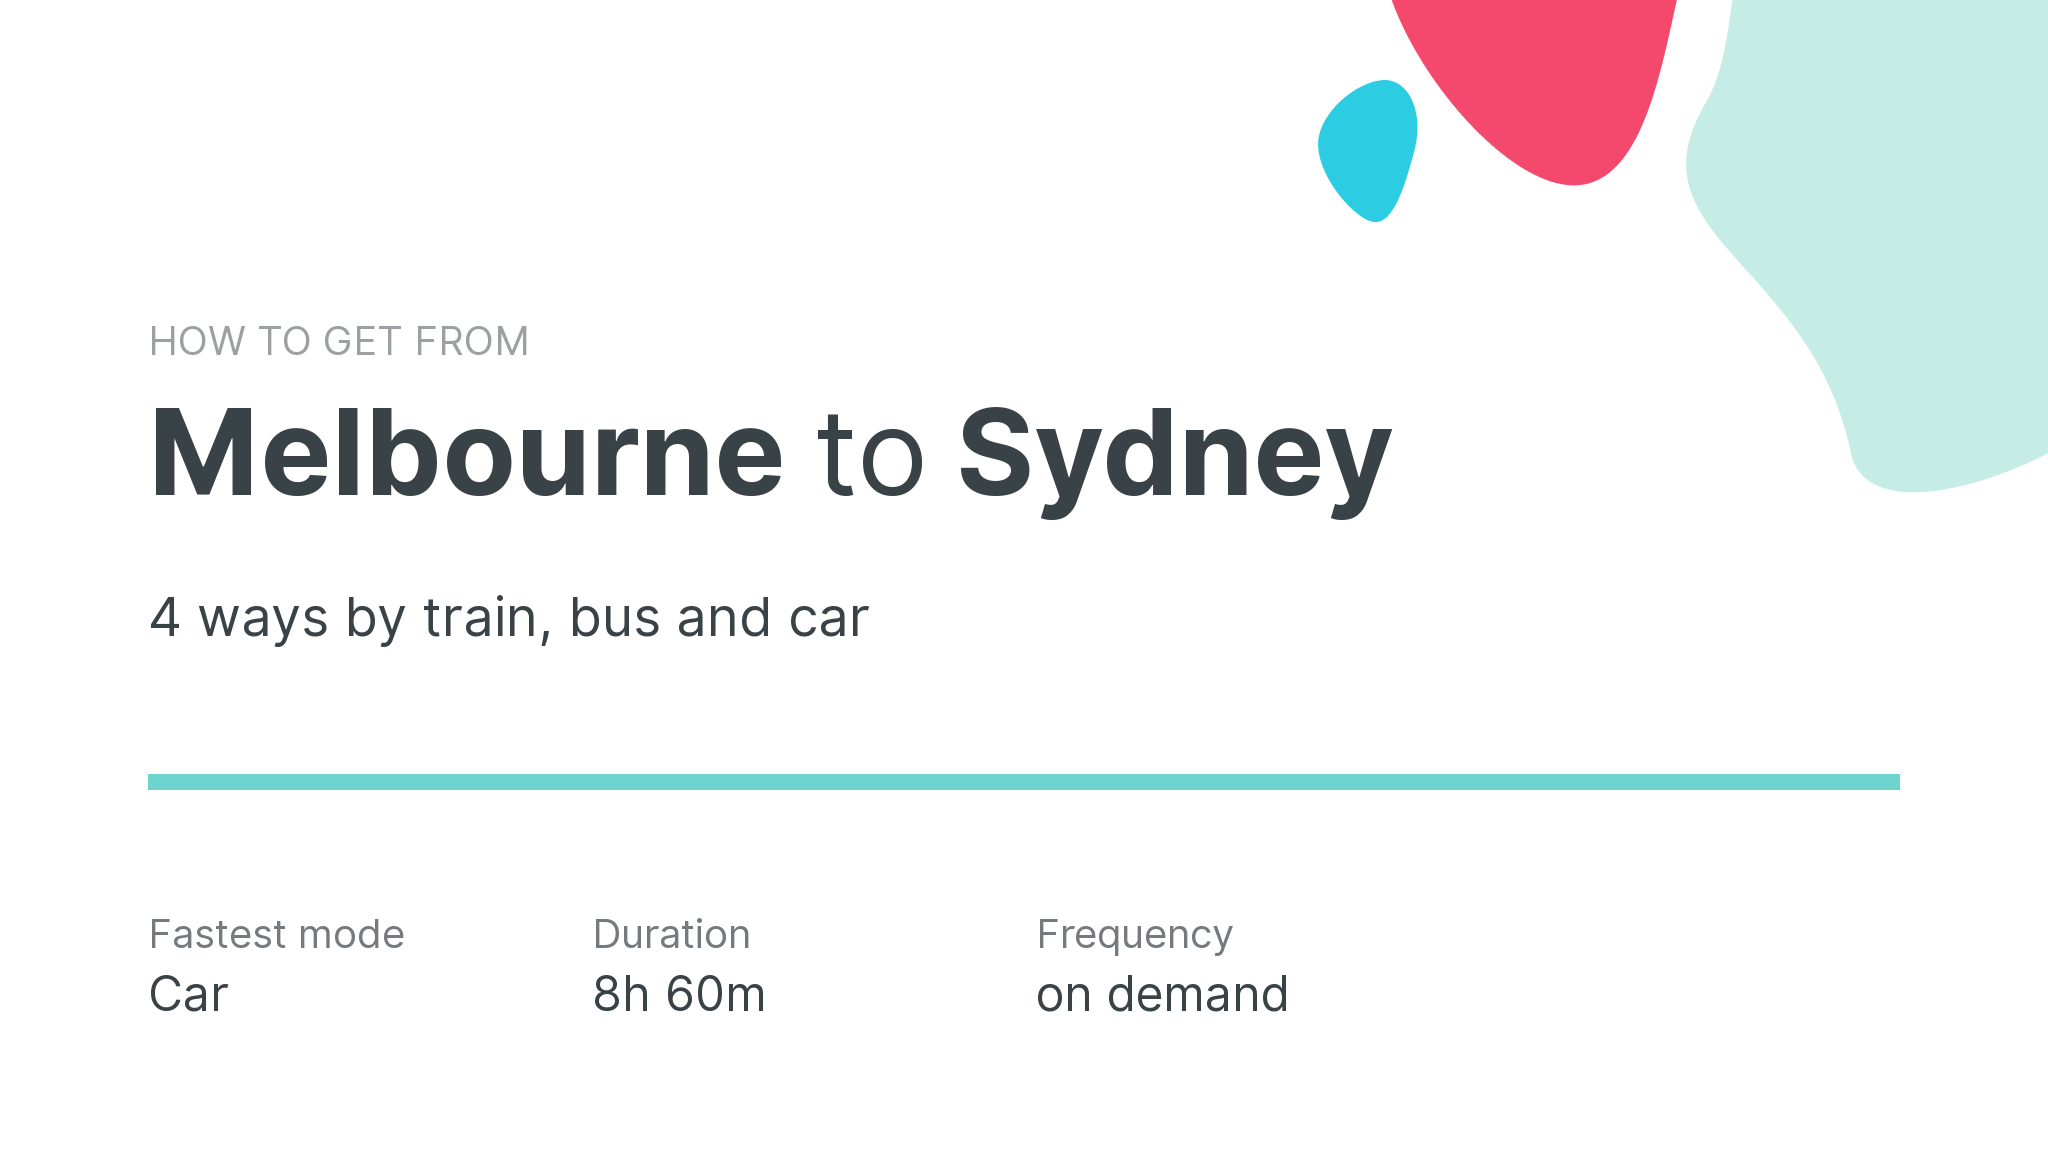 How do I get from Melbourne to Sydney